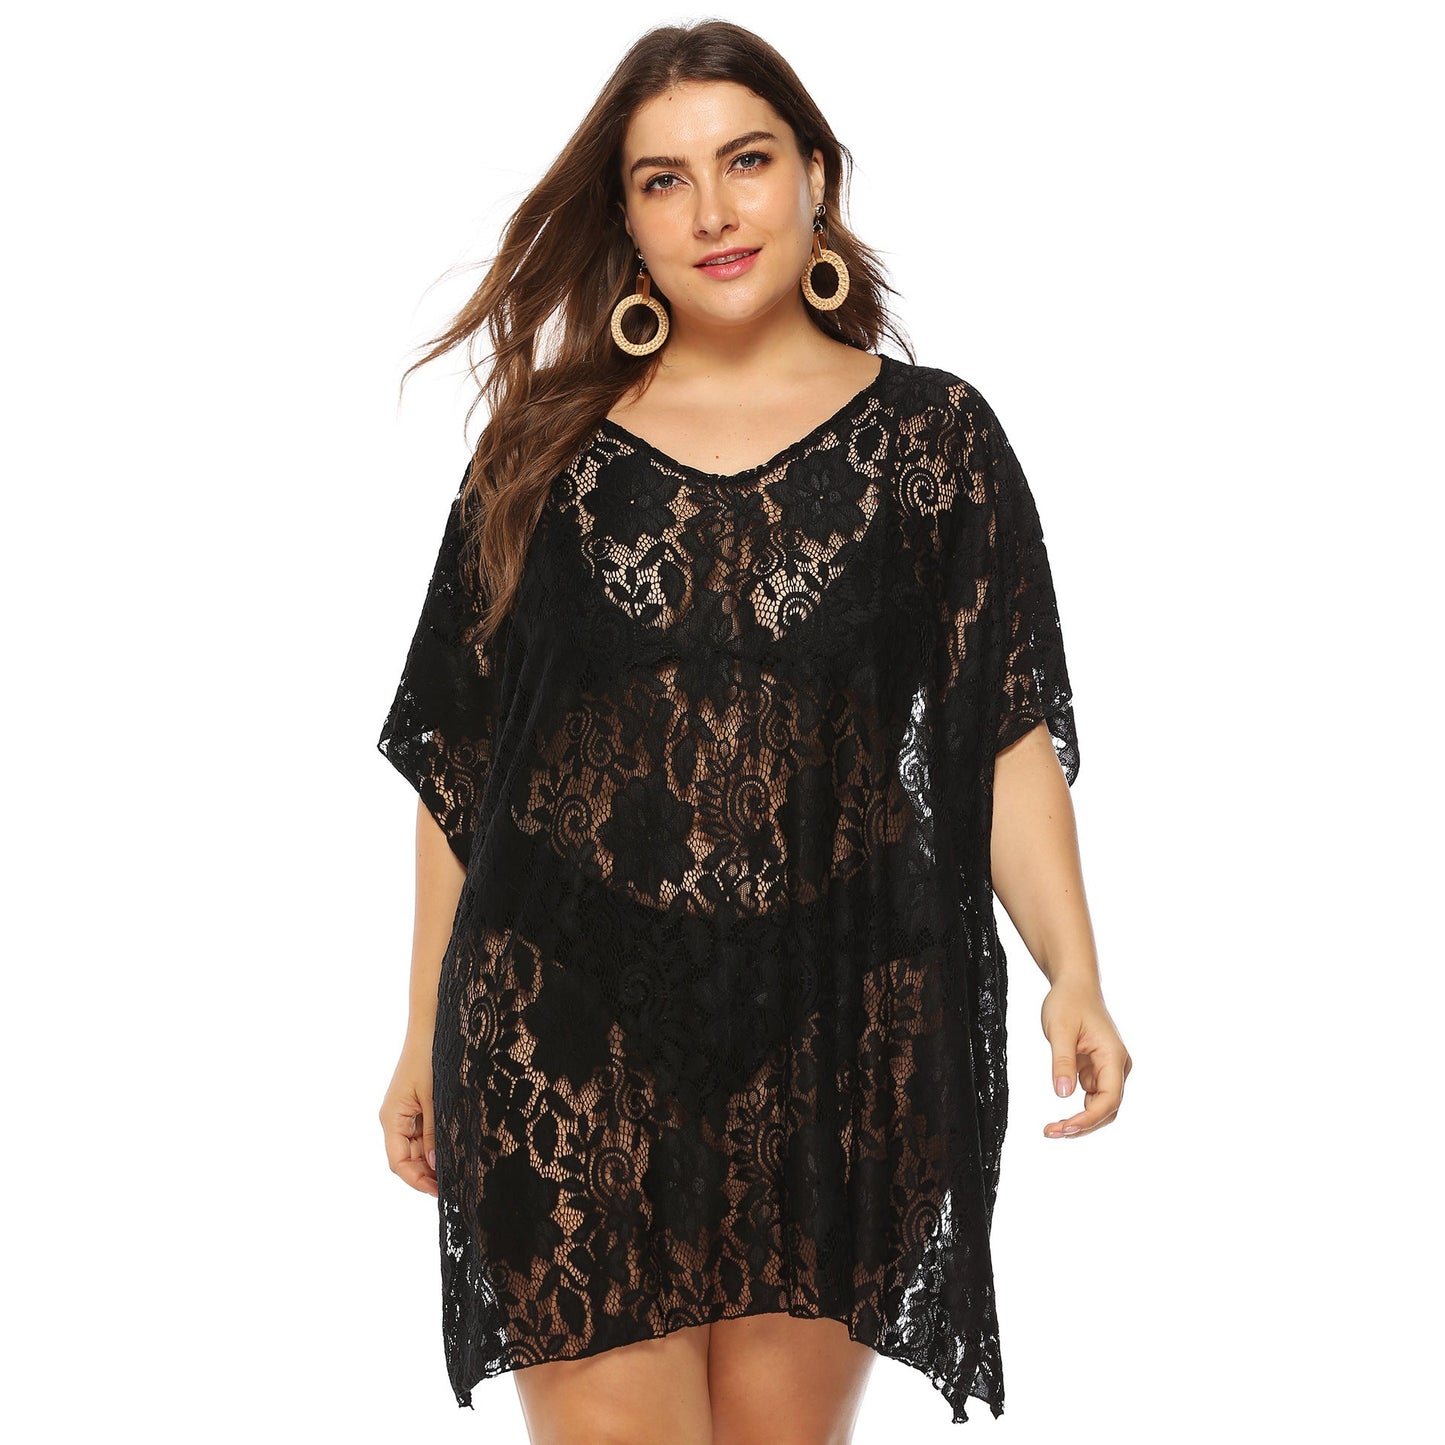 Sexy Lace See Through Plus Sizes Summer Beach Cover Ups-Swimwear-Black-1XL-Free Shipping at meselling99